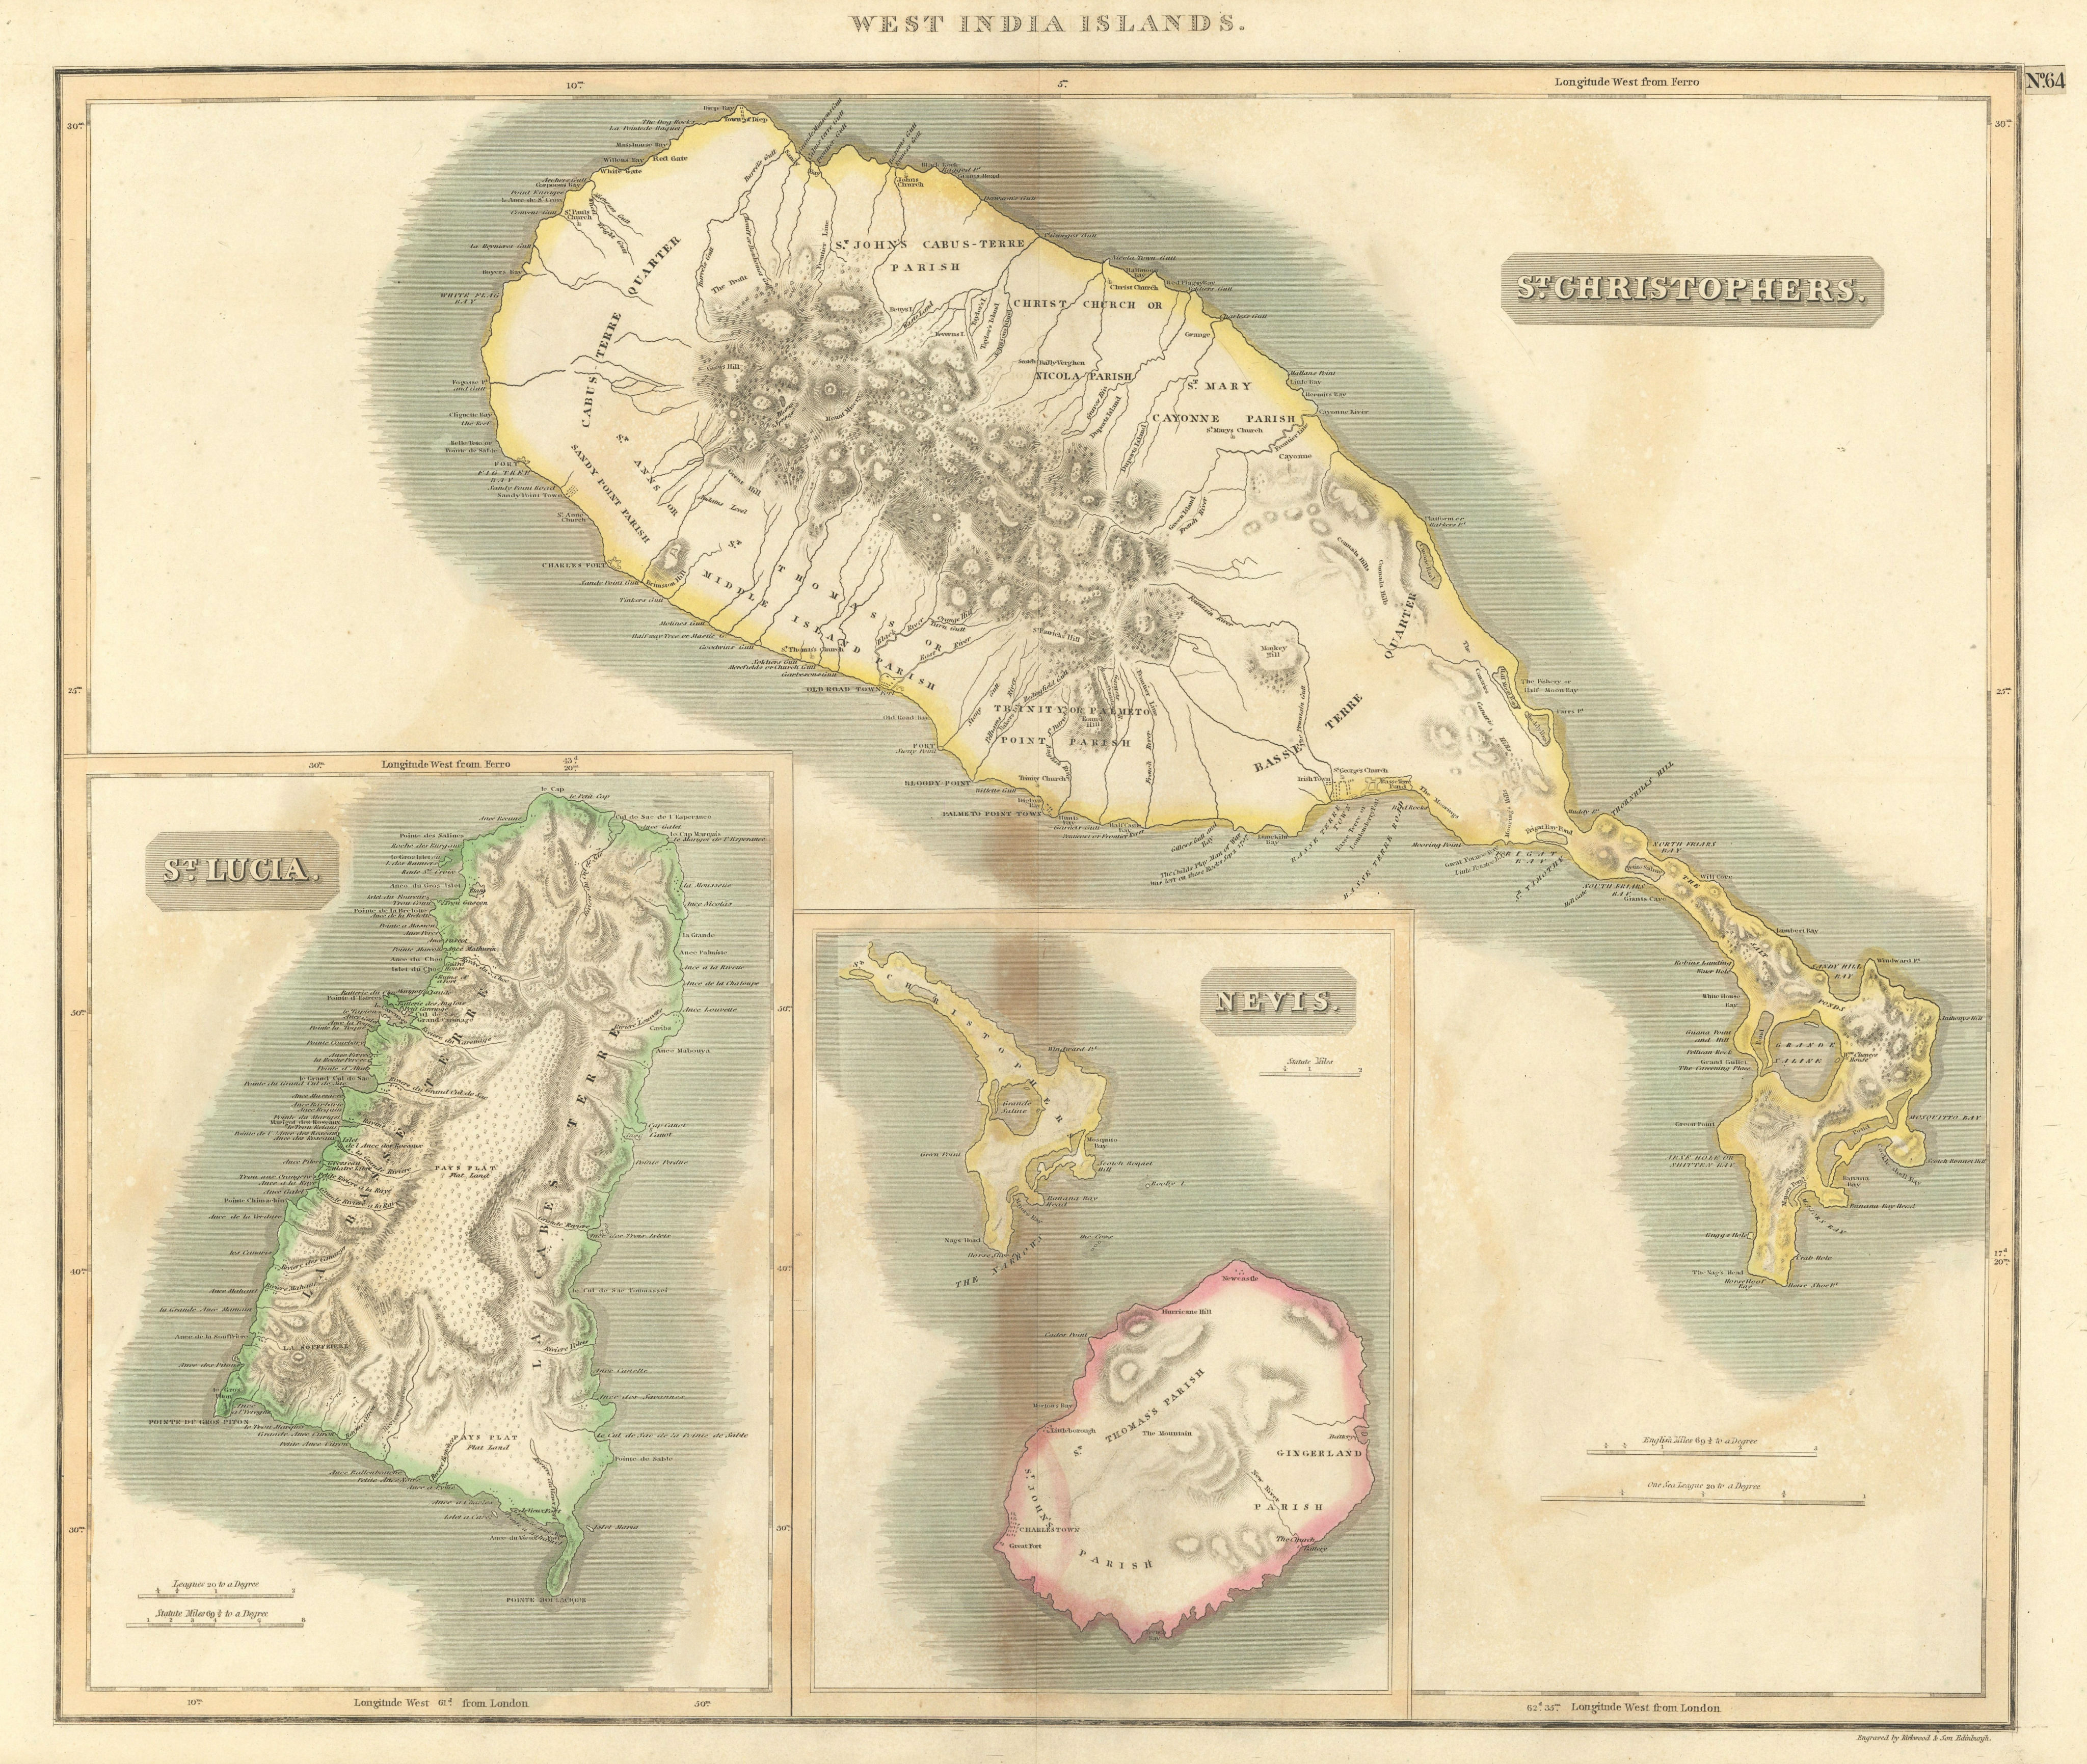 St Christophers, Nevis & St Lucia. St Kitts. West Indies. THOMSON 1817 old map